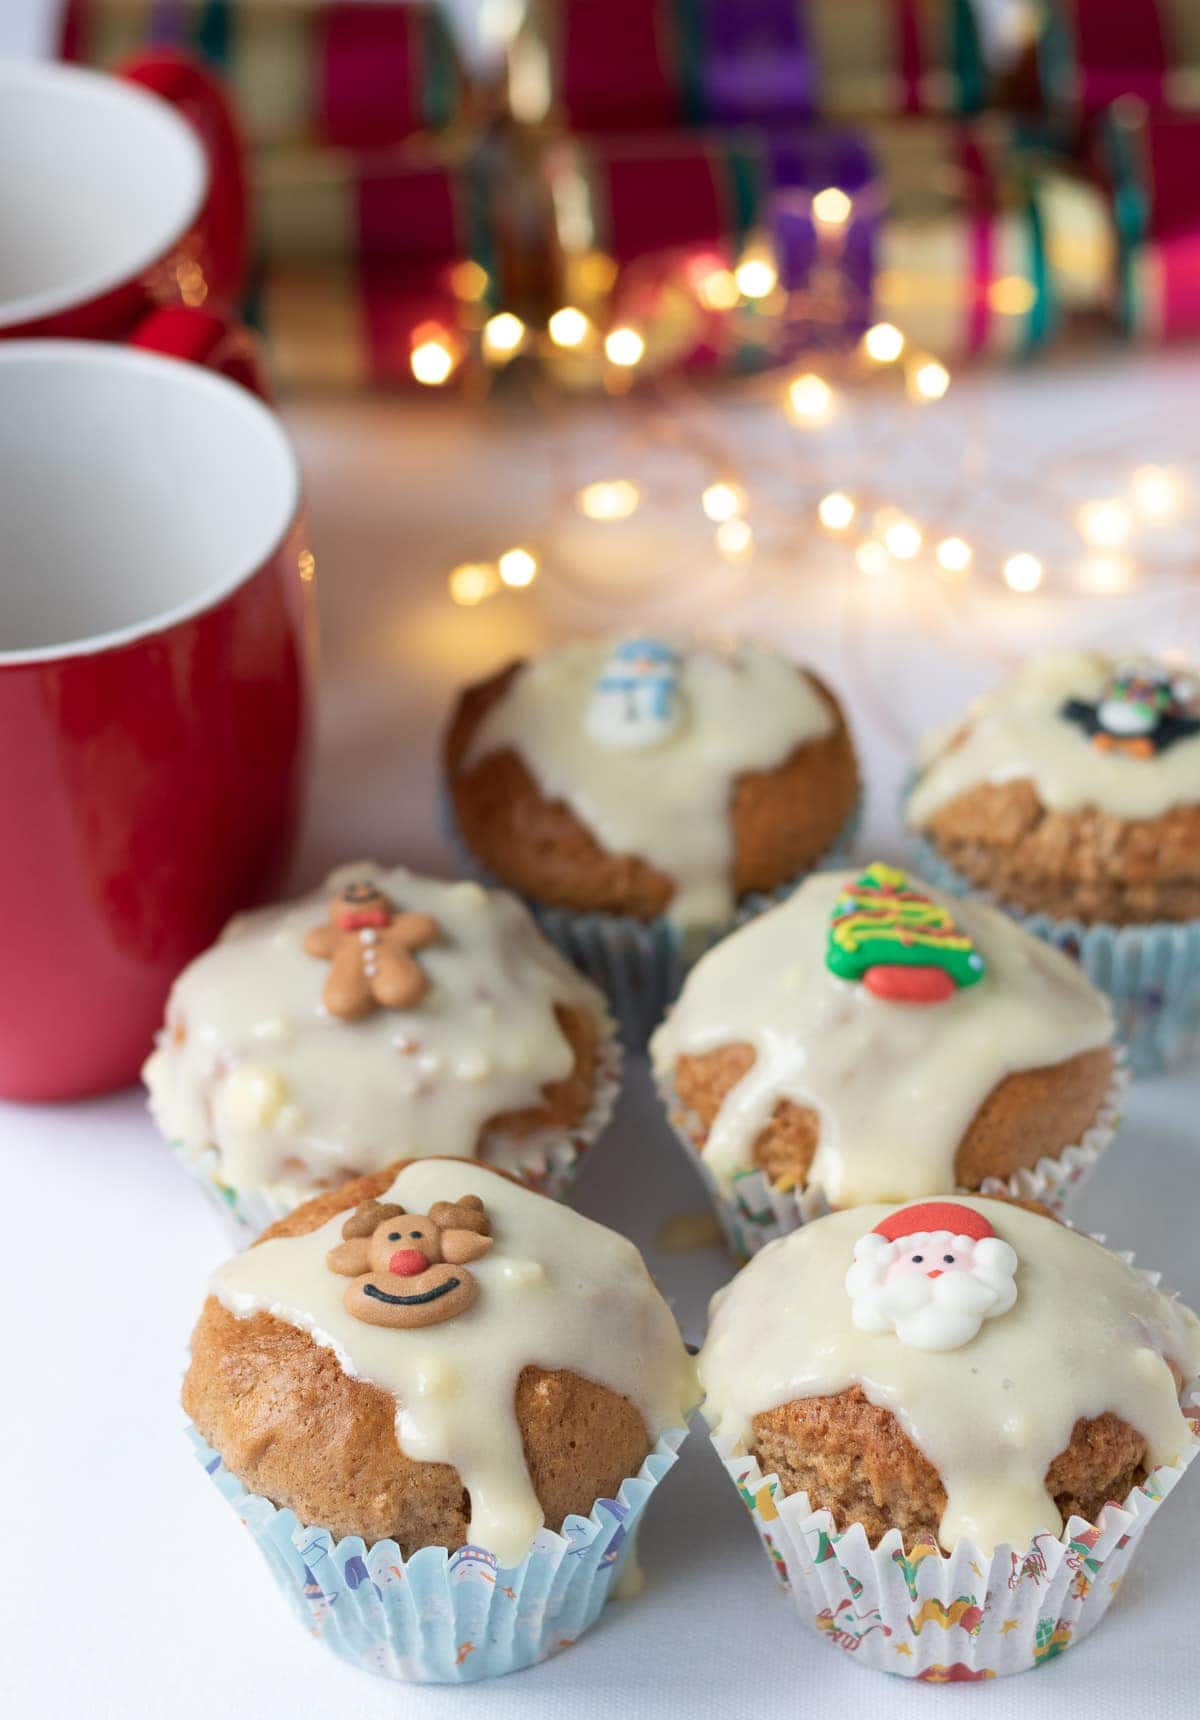 Six gingerbread muffins with cream cheese topped with christmas decorations. Two red mugs and Christmas crackers and festive lights in the background.